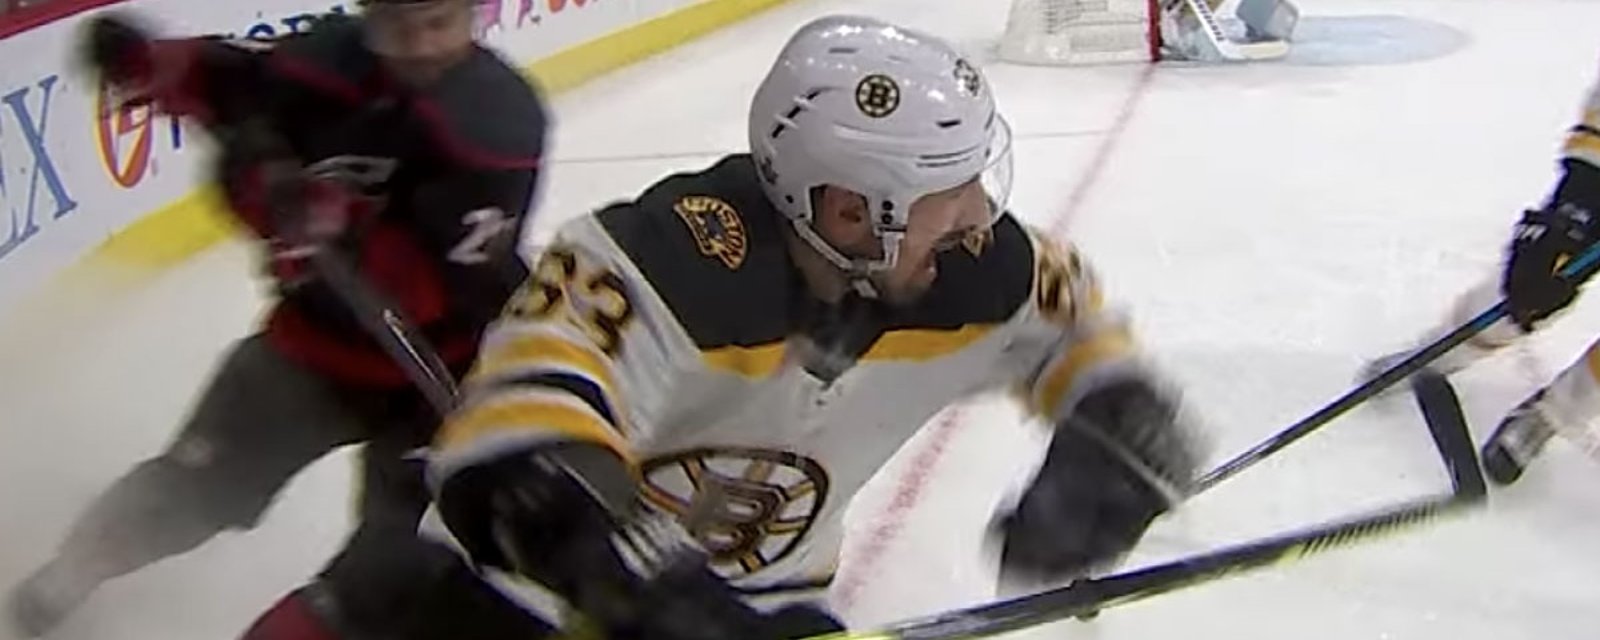 Brad Marchand fools the referees in final game vs. Canes 